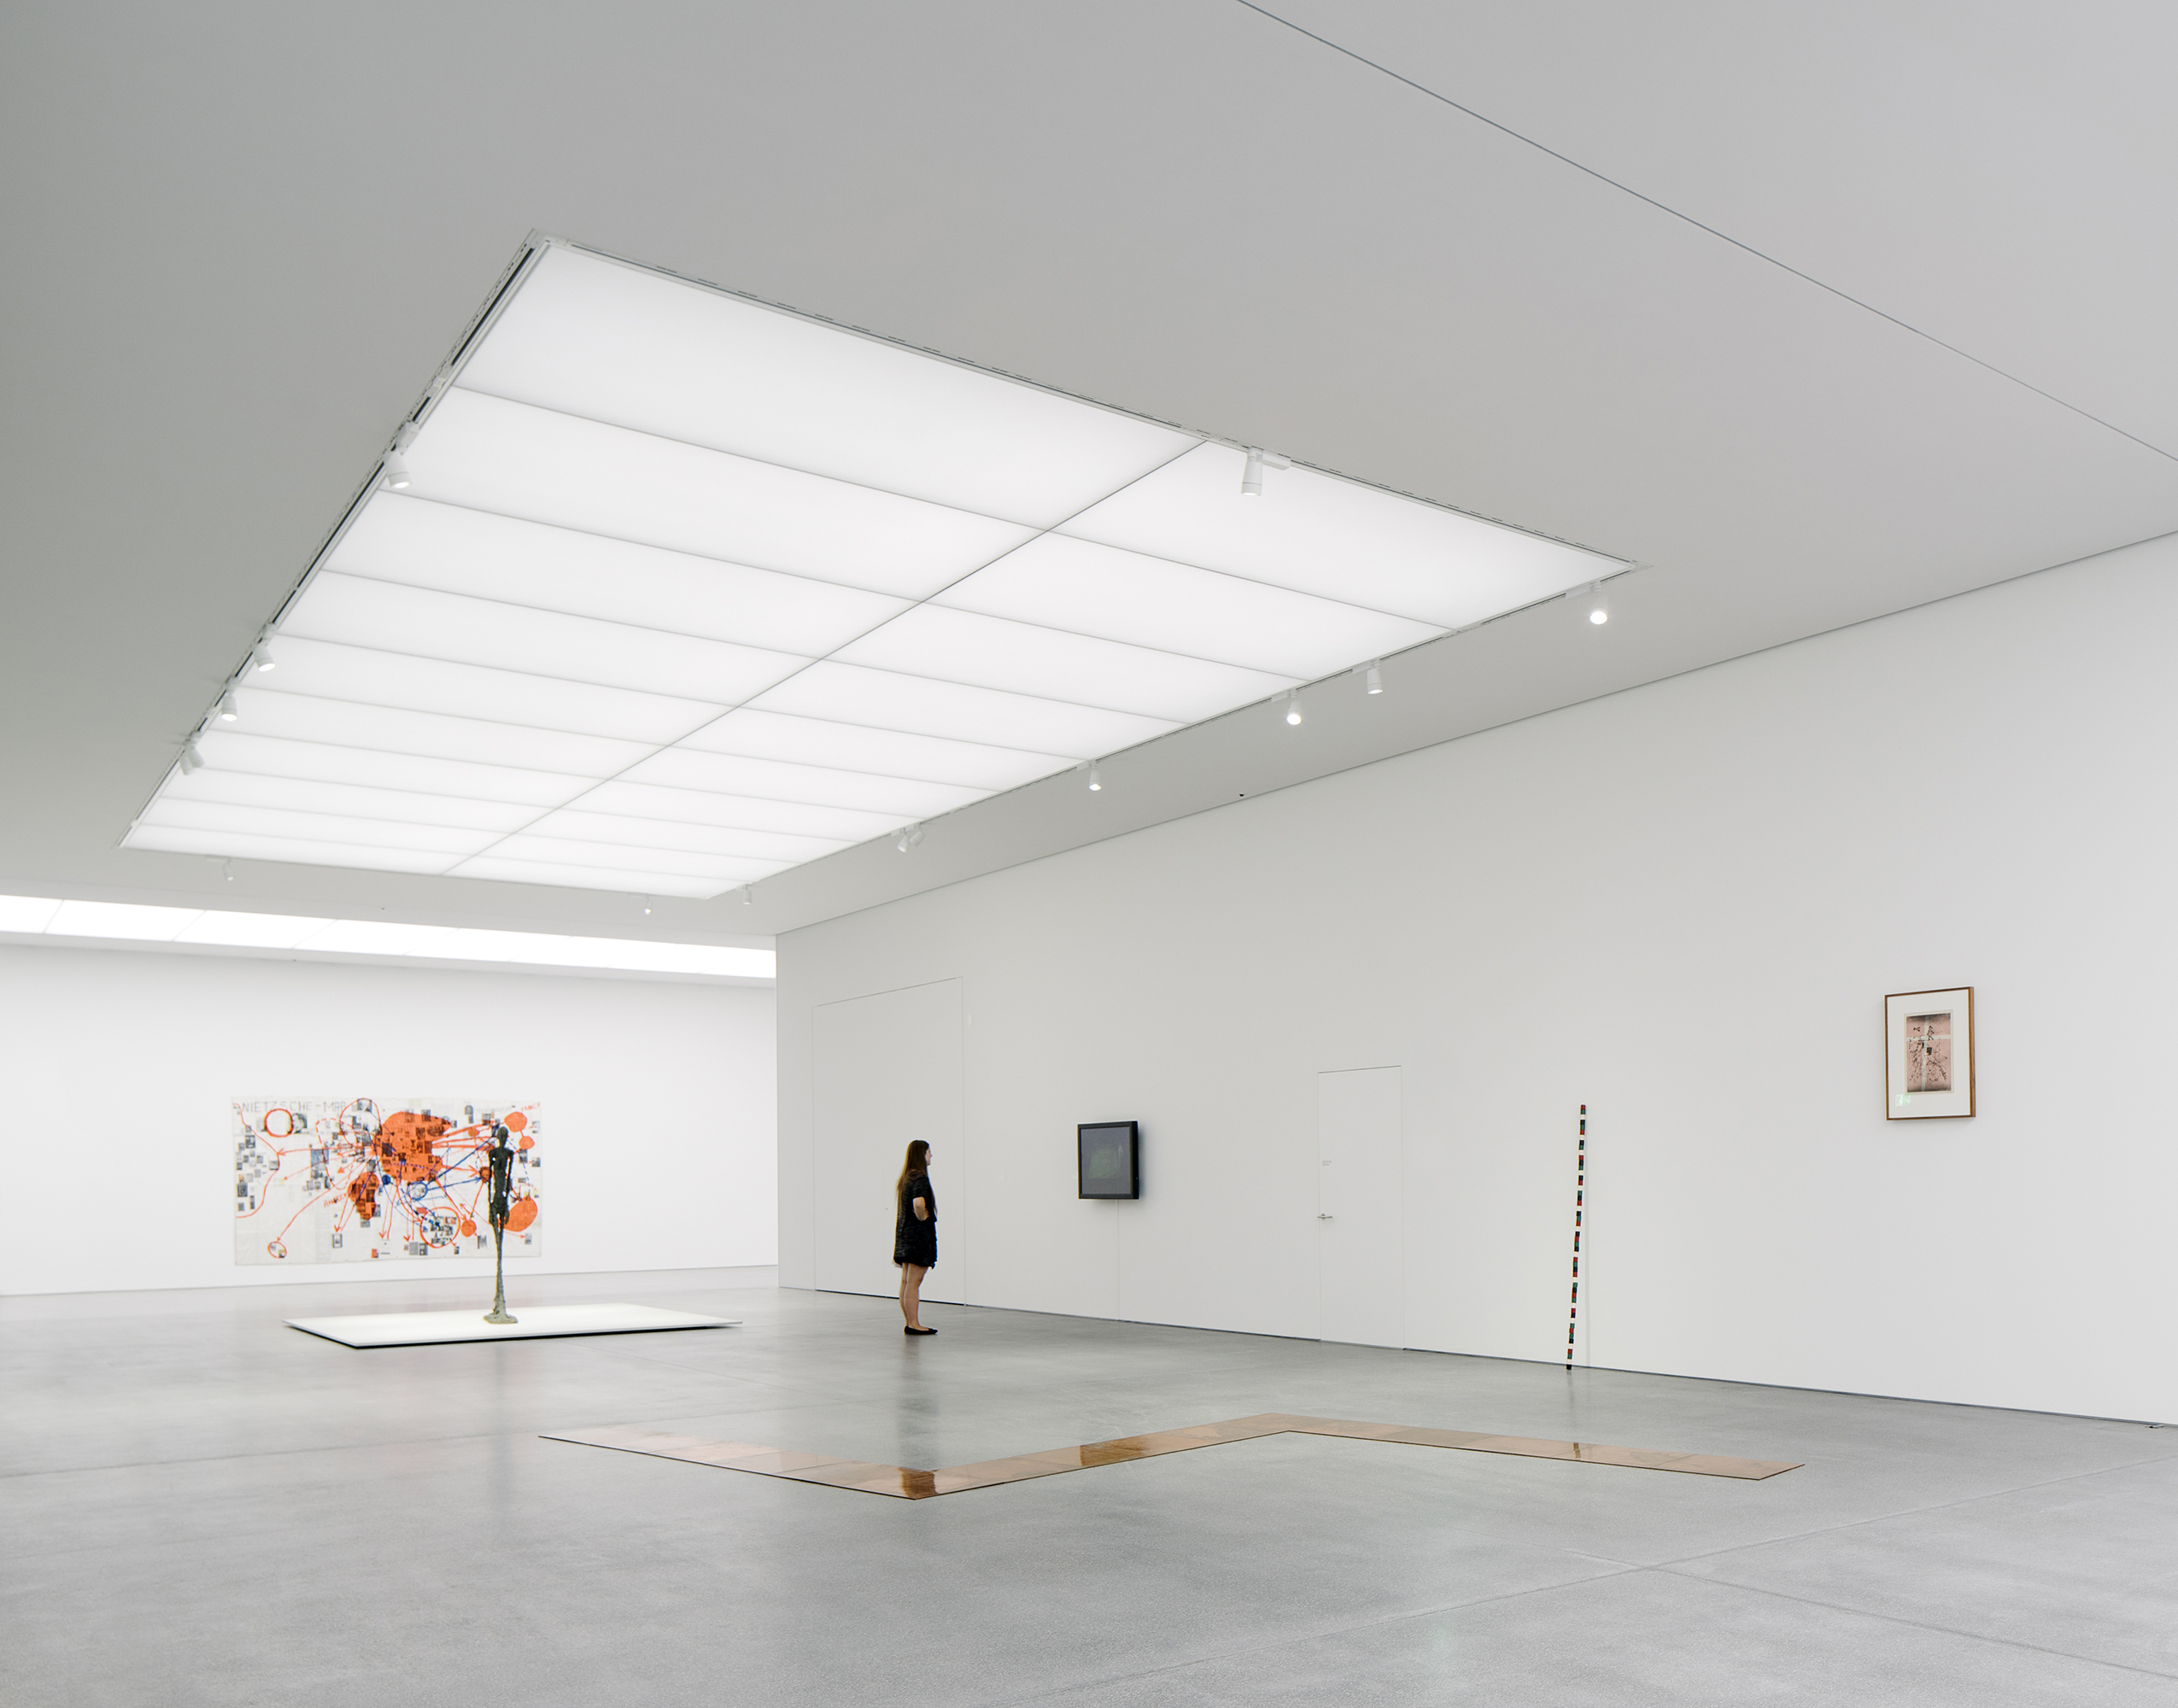 The hall inside the Bundner Kunstmuseum serves as a temporary exhibition space